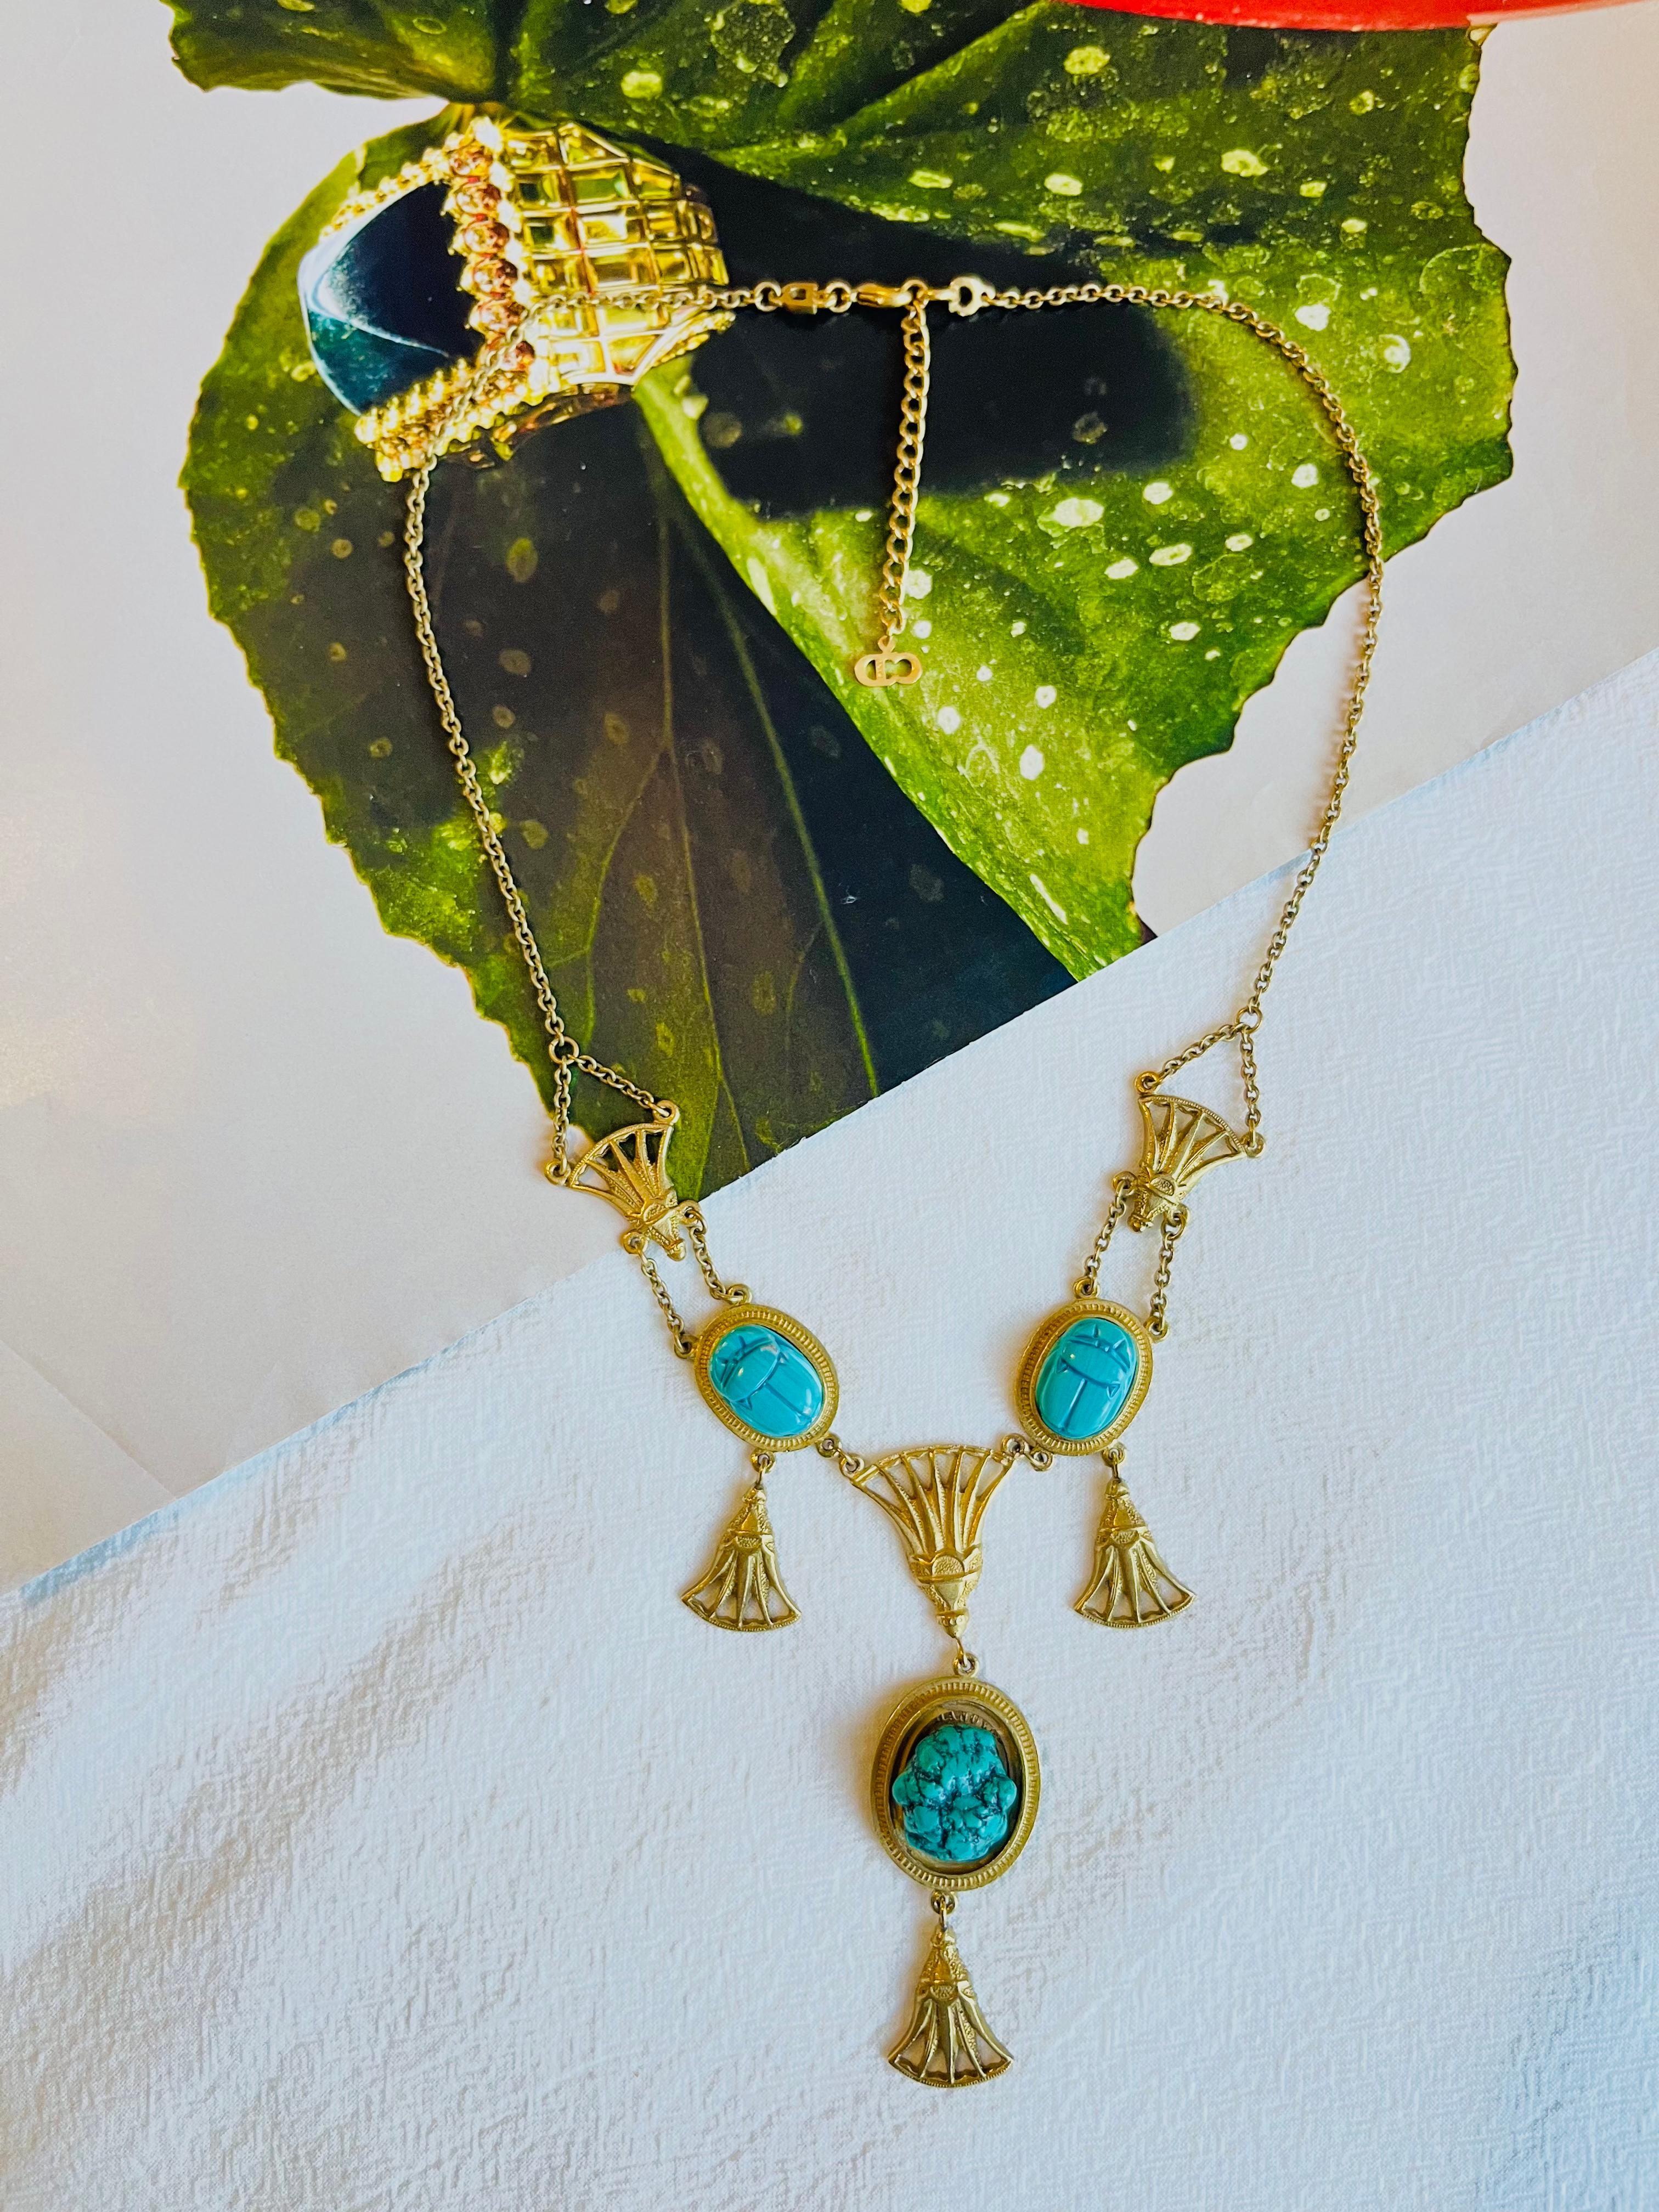 CHRISTIAN DIOR by John Galliano 2004 Egyptian Revival Turquoise Scarab Chandelier Fans Long Necklace, Gold Tone

Very good condition. The largest oval pendant has been changed to a turquoise. 100% Genuine. 

The token appears to have been added at a